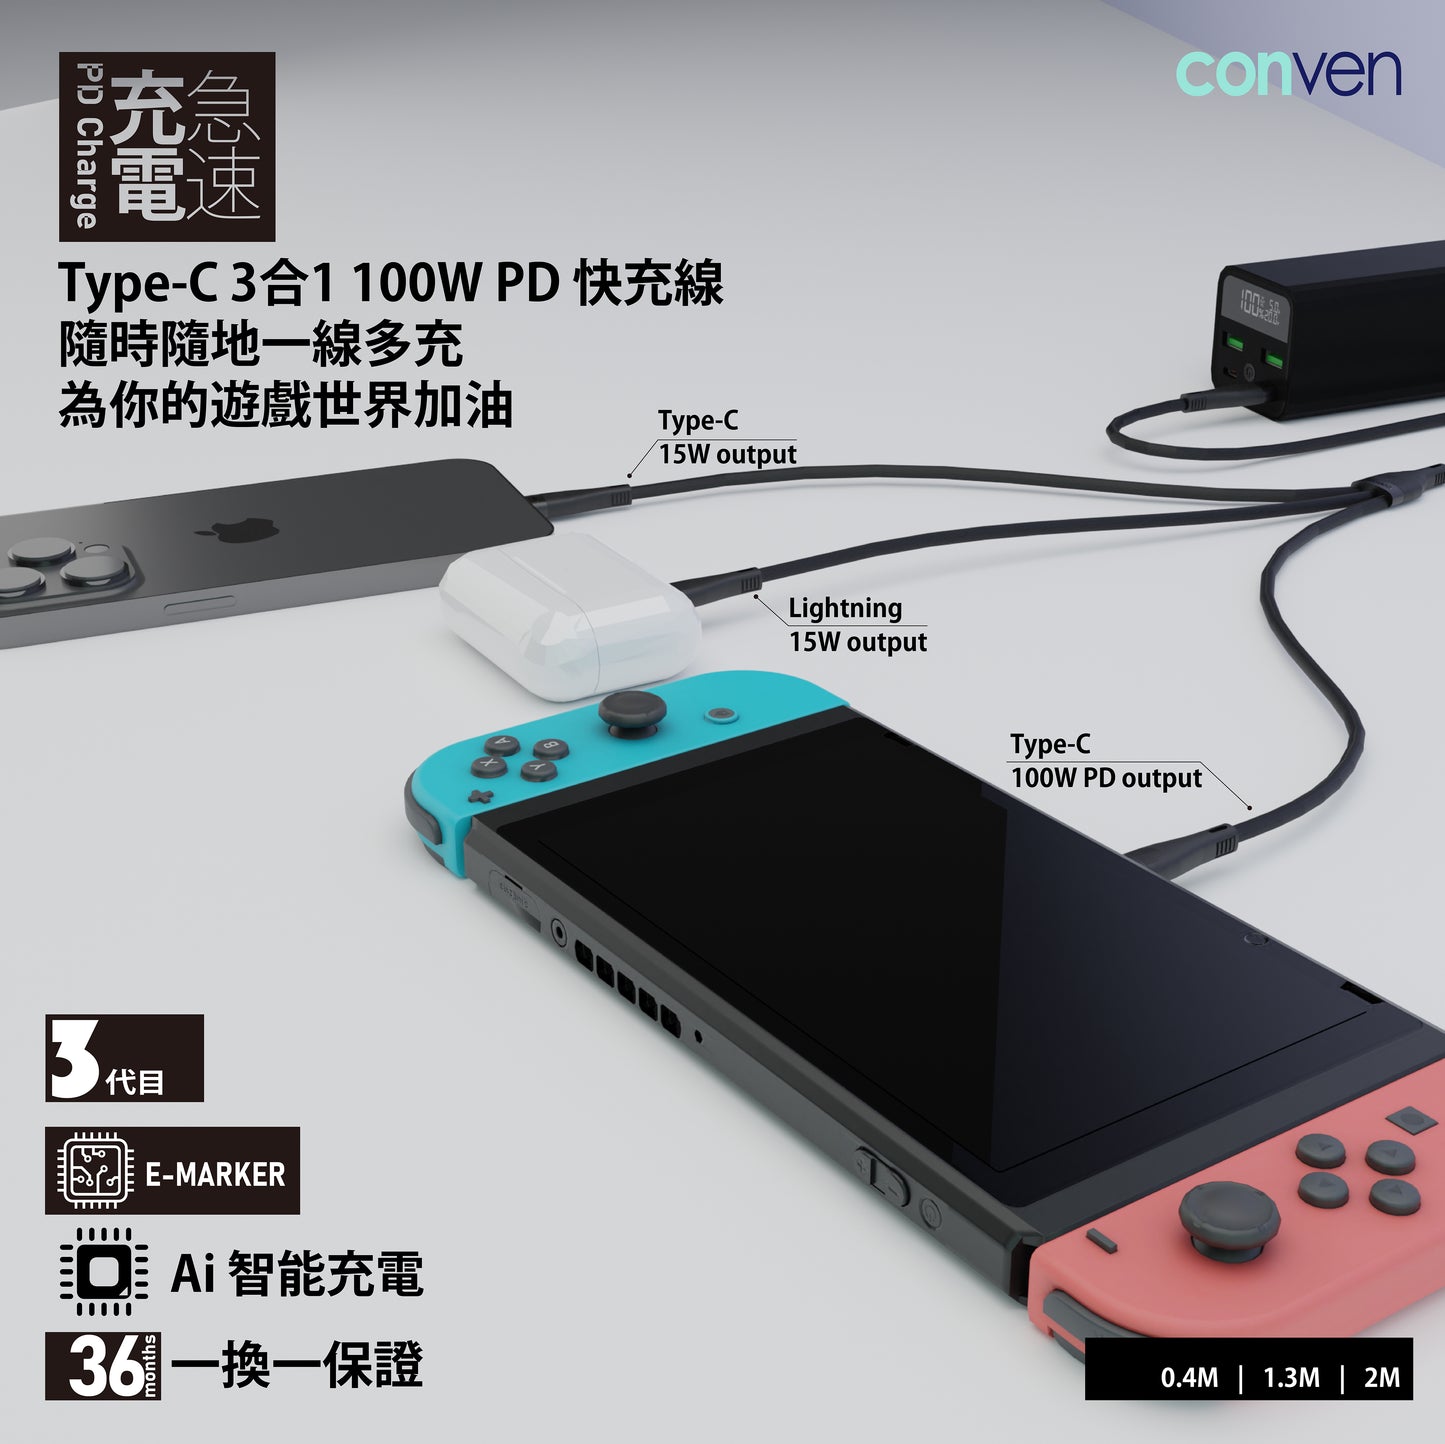 Type-C 3 in 1 100W PD  (Gen 3) Quick charge Cable